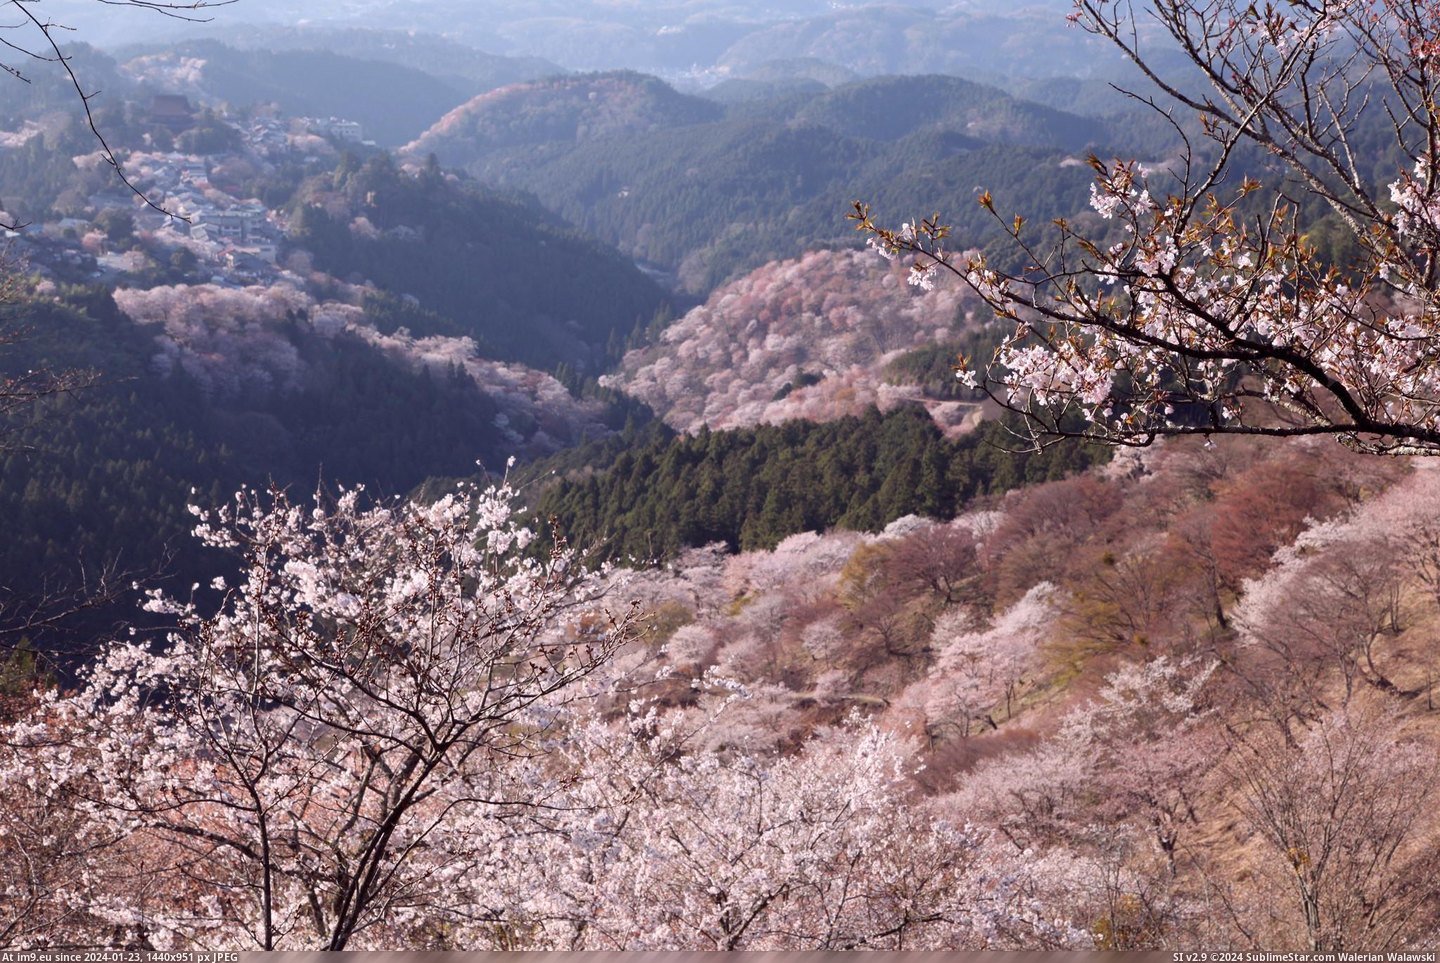 #Japan #Mountain #Covered #Yoshino #Mountainside #Cherry #2048x1365 #Blossoms [Earthporn] A mountainside covered in cherry blossoms at Yoshino Mountain, Japan [2048x1365] Pic. (Изображение из альбом My r/EARTHPORN favs))